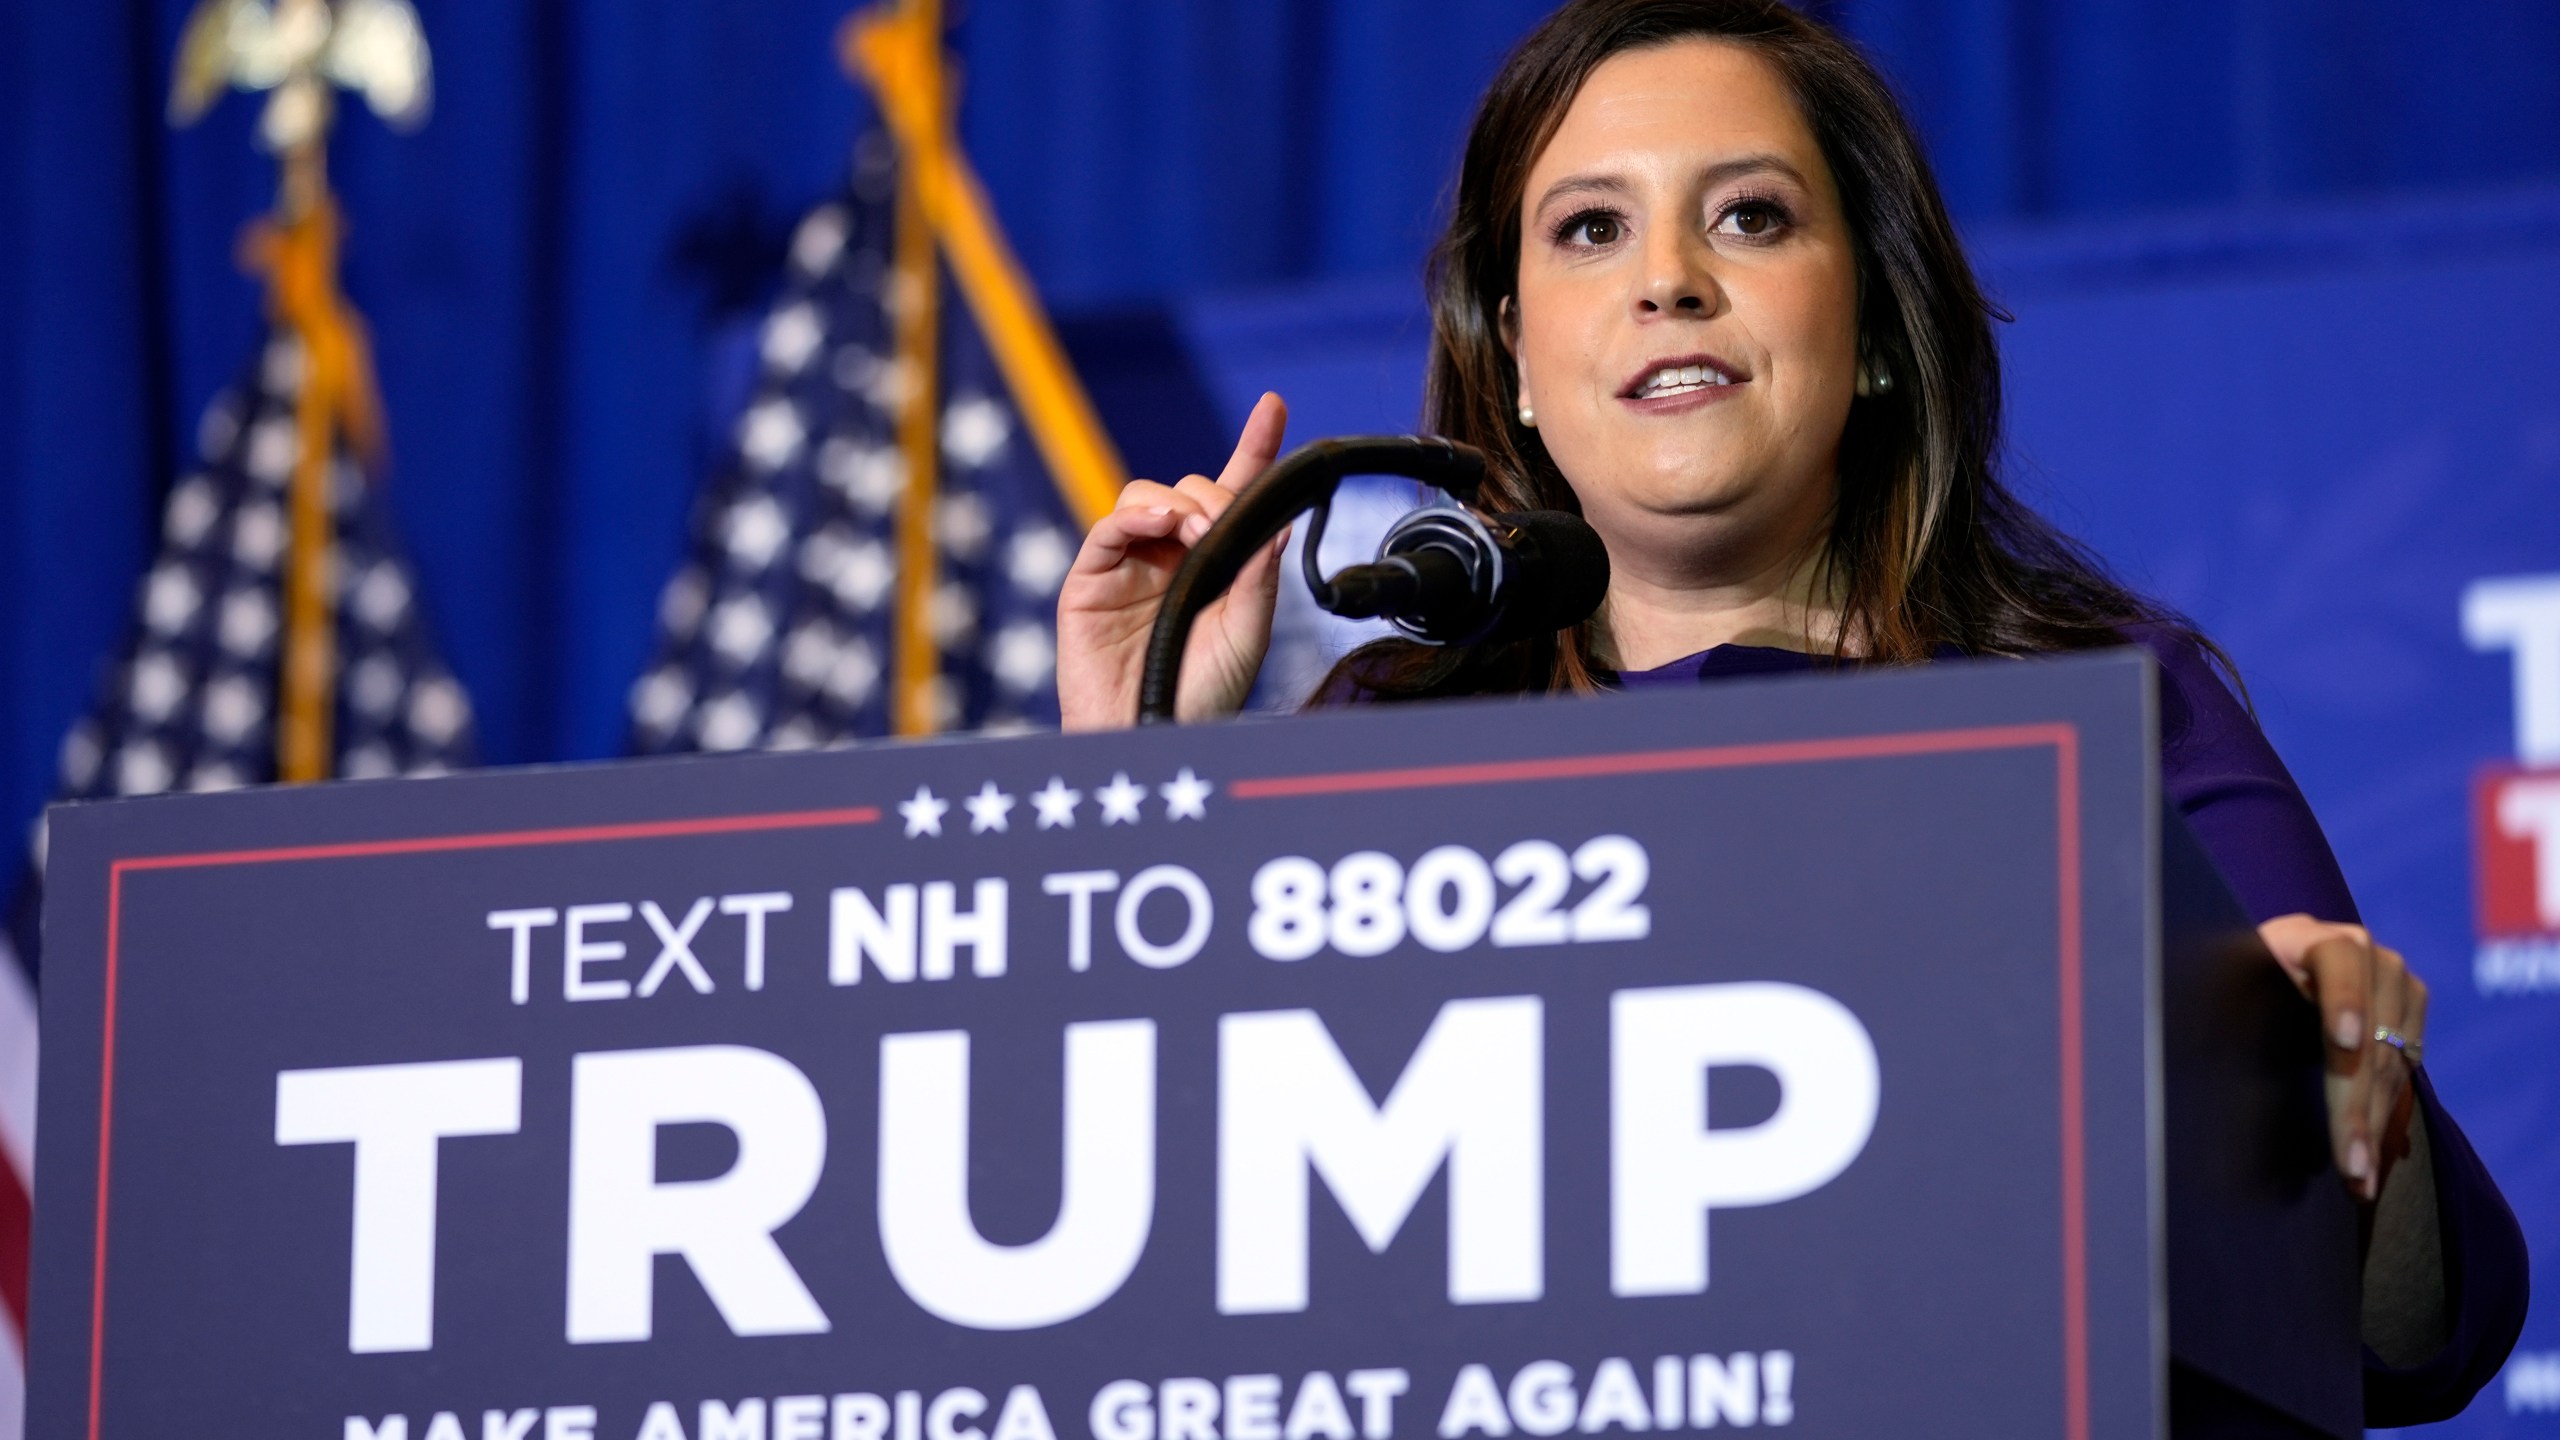 FILE - Rep. Elise Stefanik, R-N.Y., speaks at a campaign event in Concord, N.H., Jan. 19, 2024. In some cases, Donald Trump's potential vice presidential contenders have had to abandon long-held policy positions and recant vehement criticism. Stefanik criticized Trump's comments on the "Access Hollywood" tape and disagreed with his position on NATO, his decision to withdraw from the landmark Paris climate agreement and his ban on travelers from predominantly Muslim countries. (AP Photo/Matt Rourke, File)